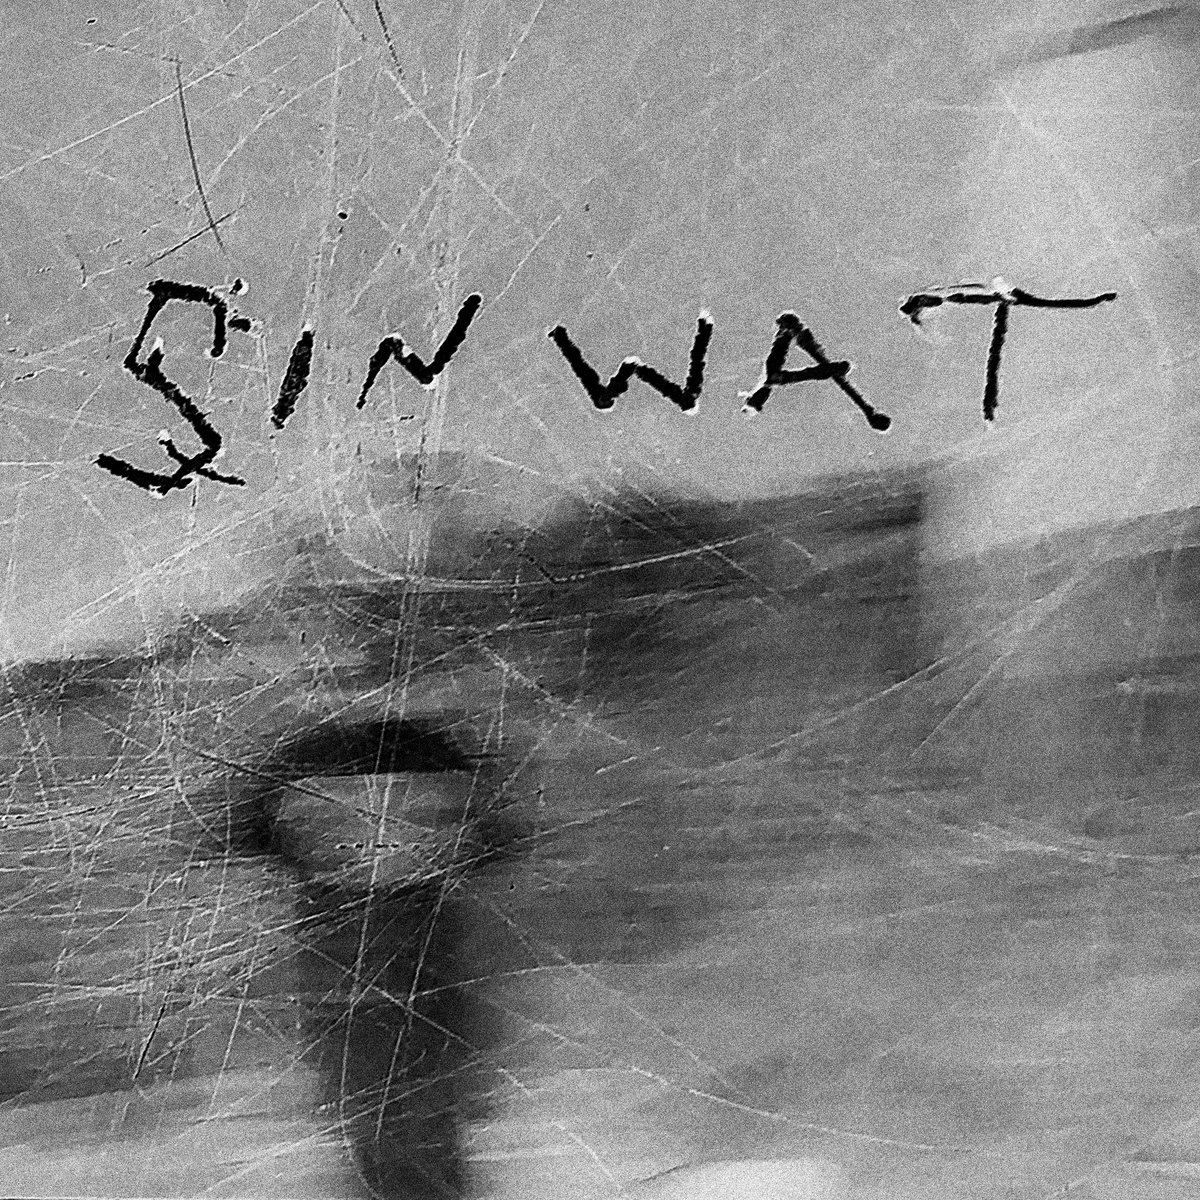 sinwat album art - blurry black and white photo covered in scratches, with black text that reads "Sinwat"